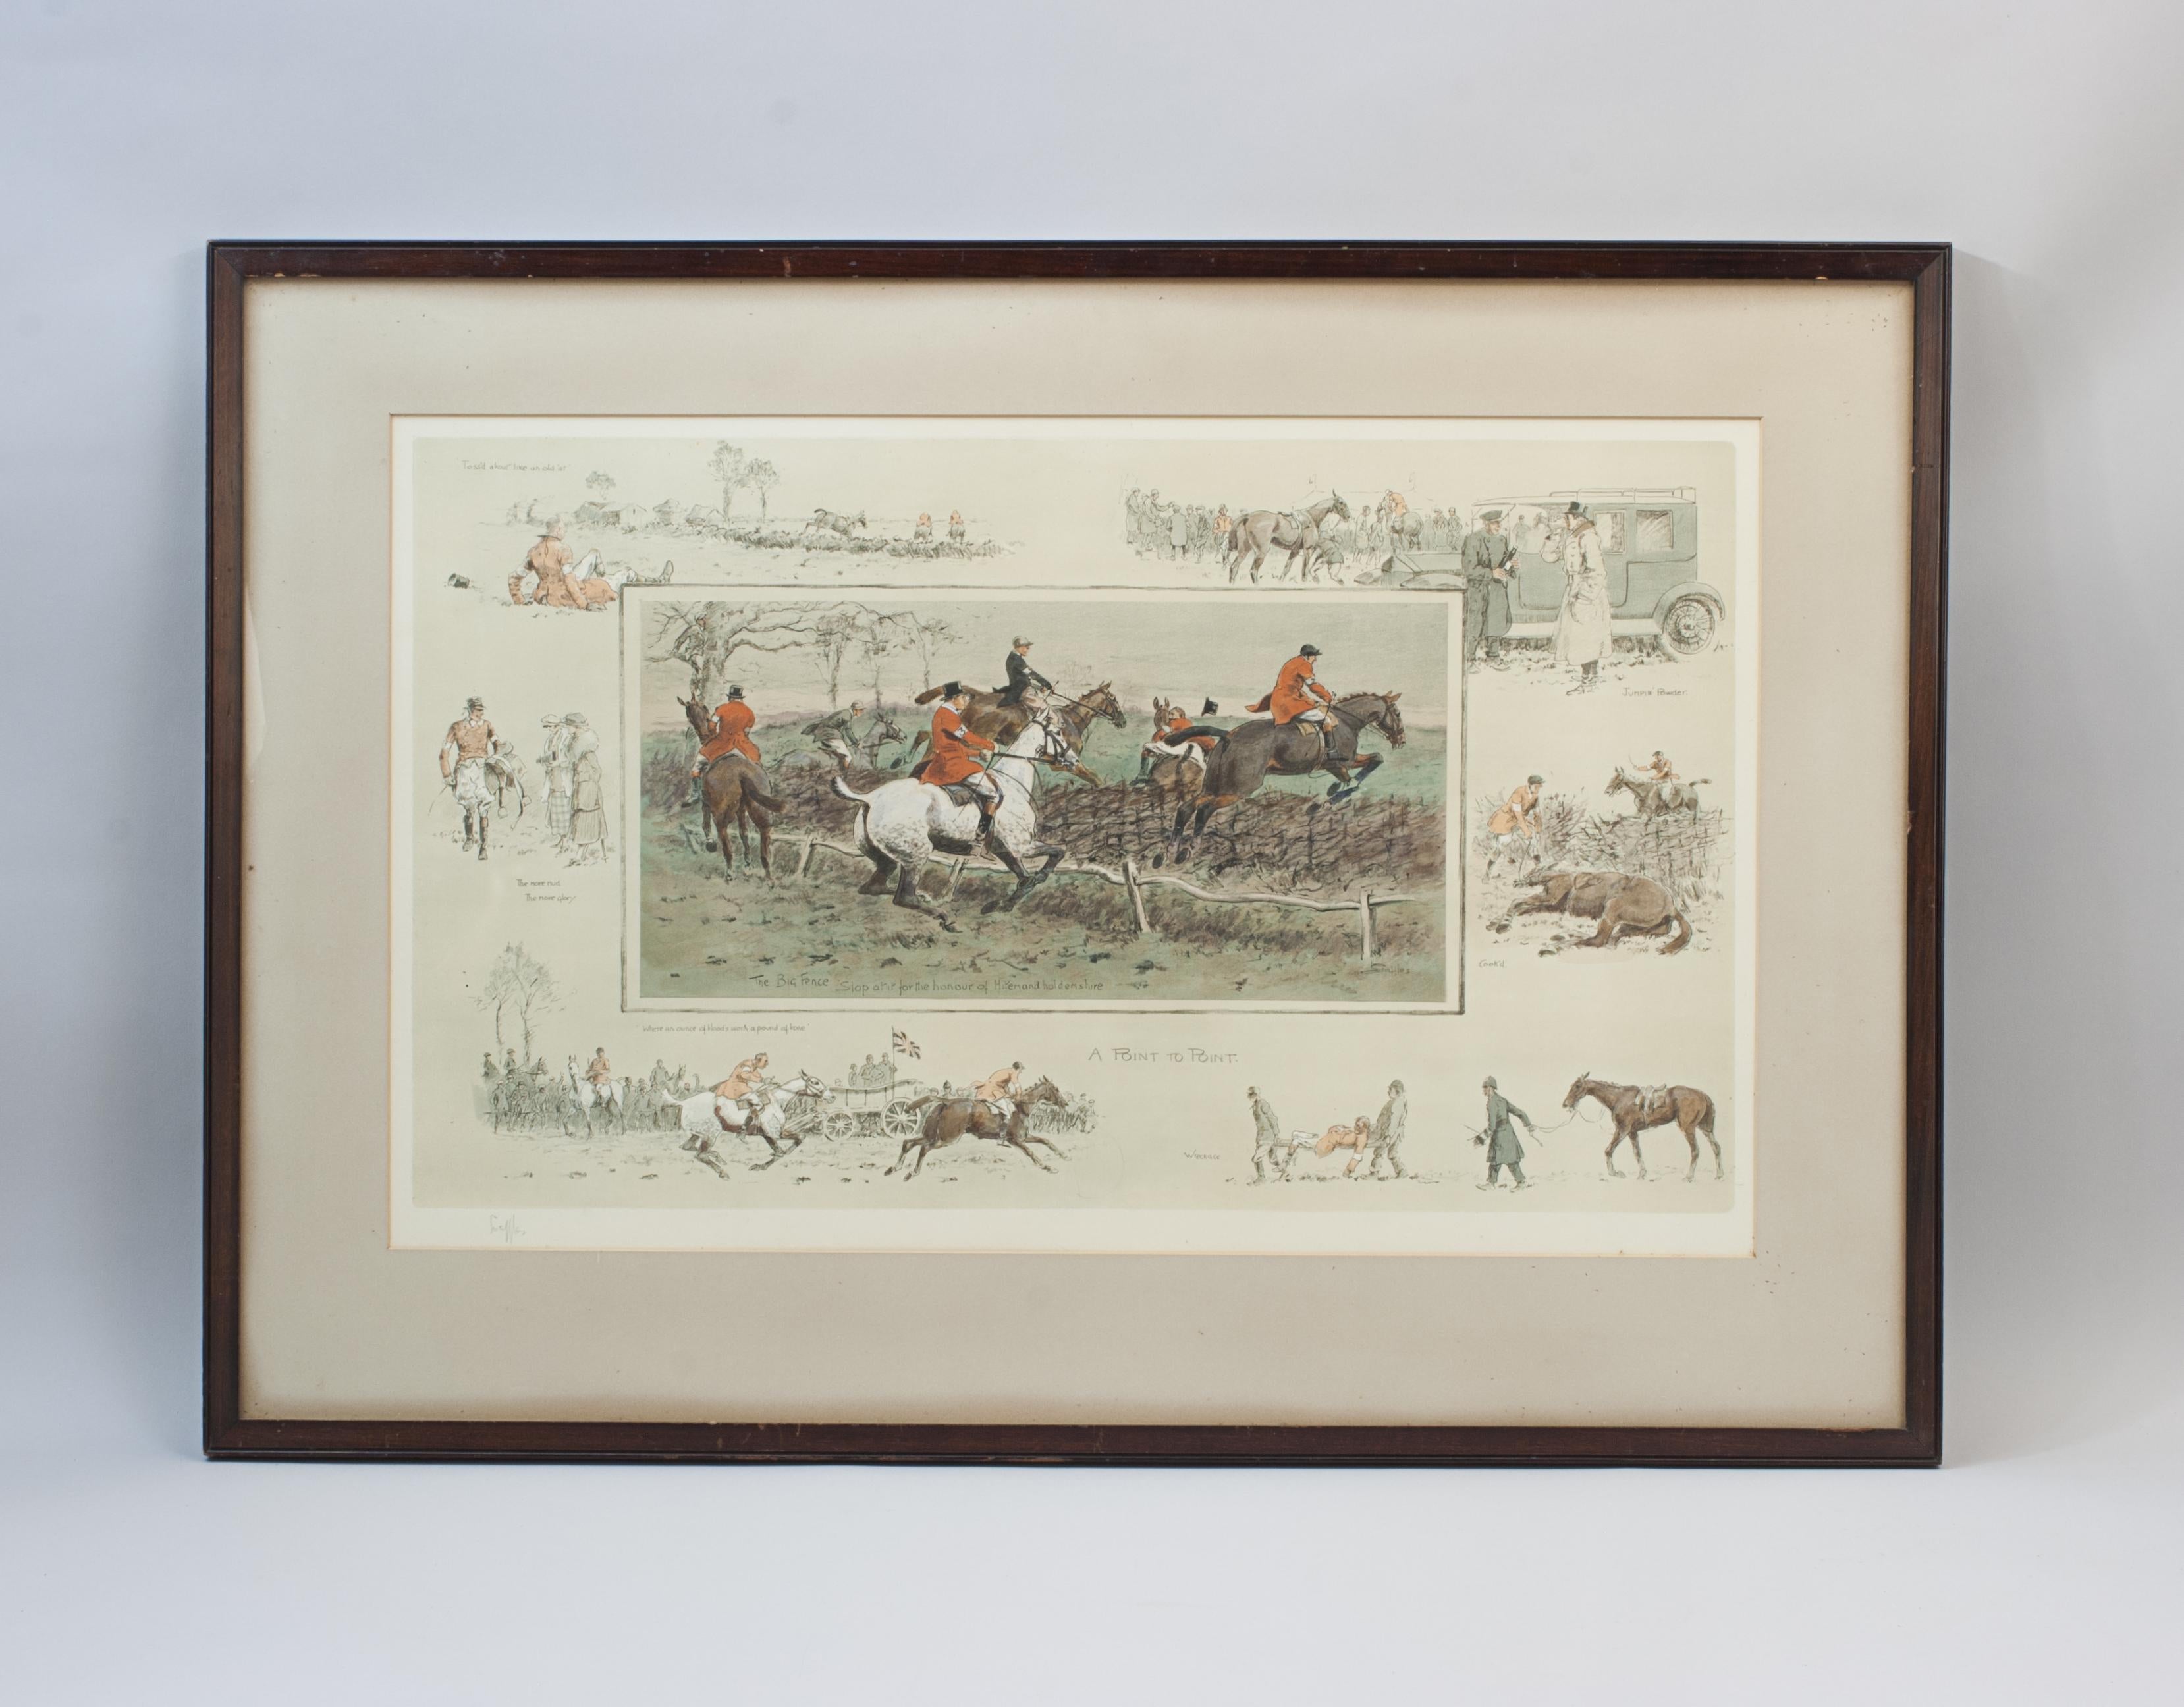 Vintage Snaffles Horse Racing Print, A Point To Point. Charles Johnson Payne.
A good framed equestrian hand coloured lithograph by Snaffles, titled 'A Point To Point'. The colourful main image shows six jockeys jumping a fence with the caption 'The